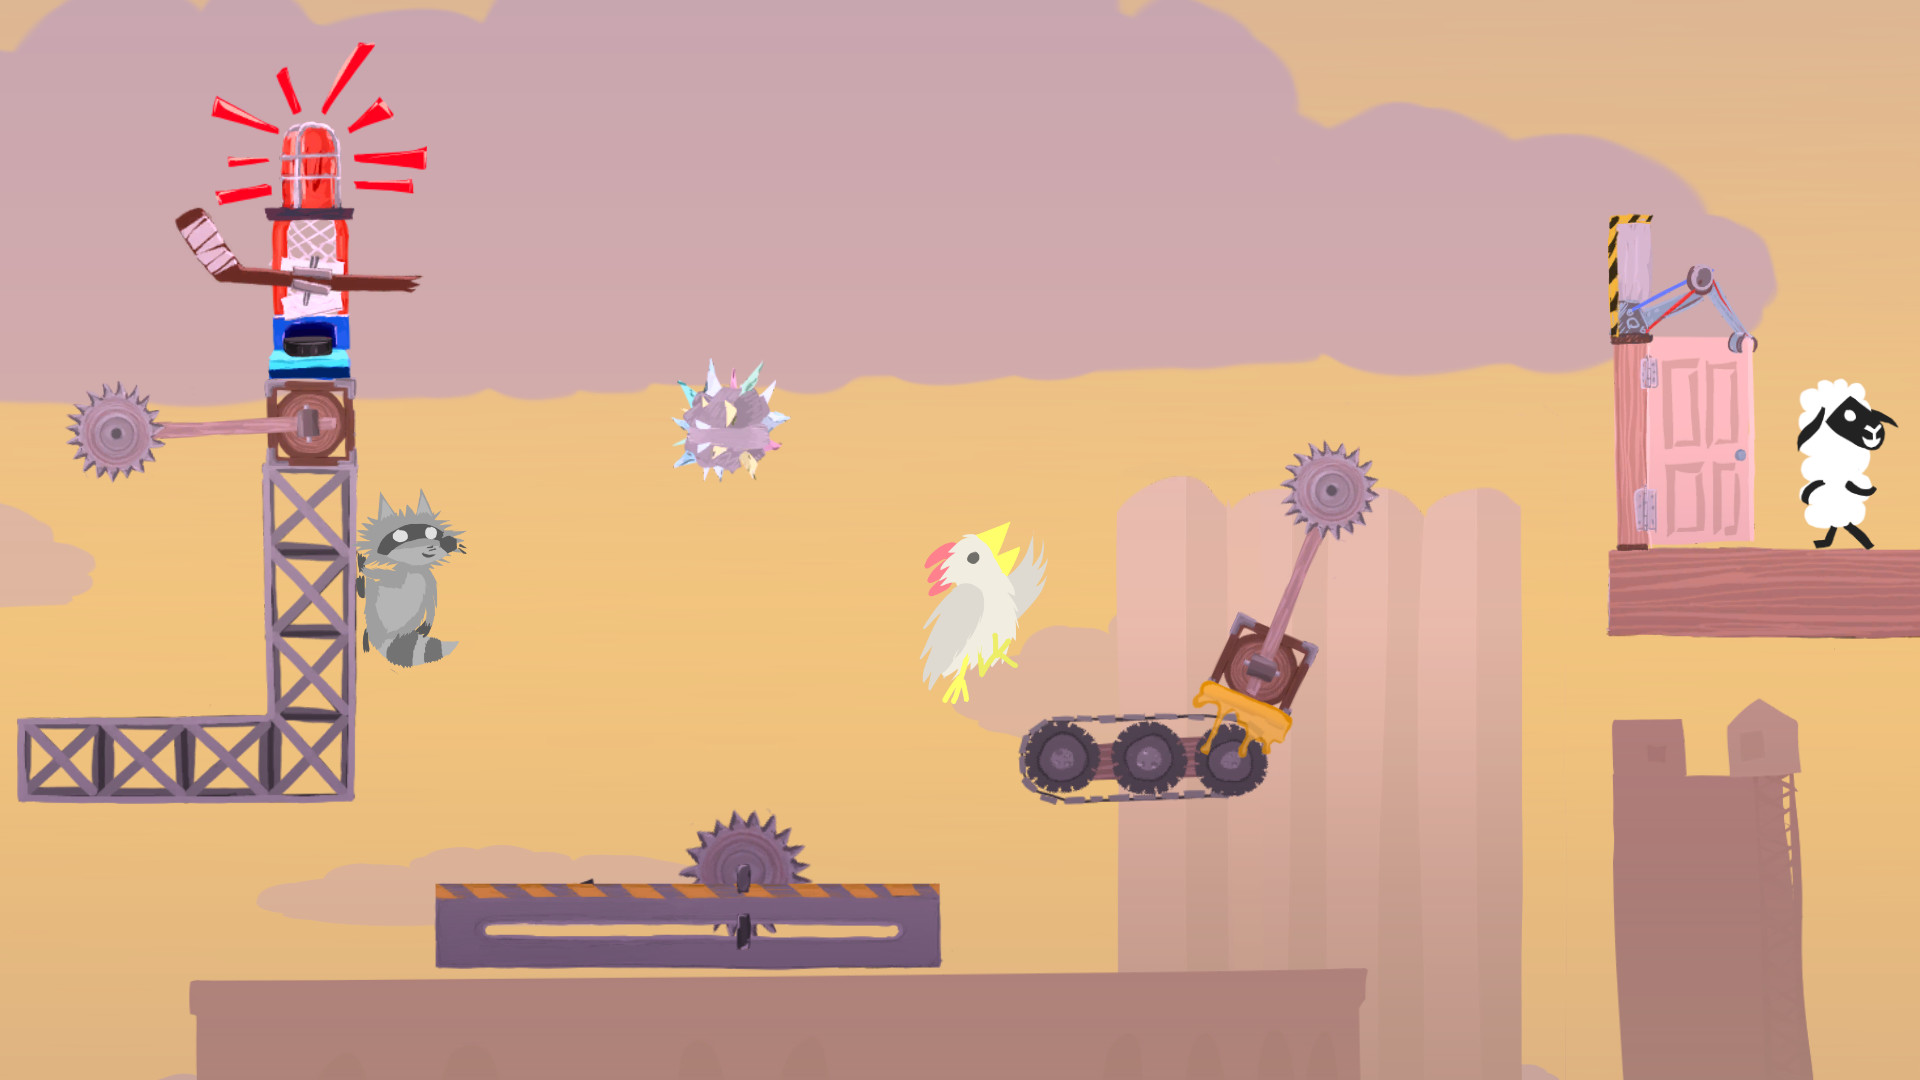 ultimate chicken horse free download mac